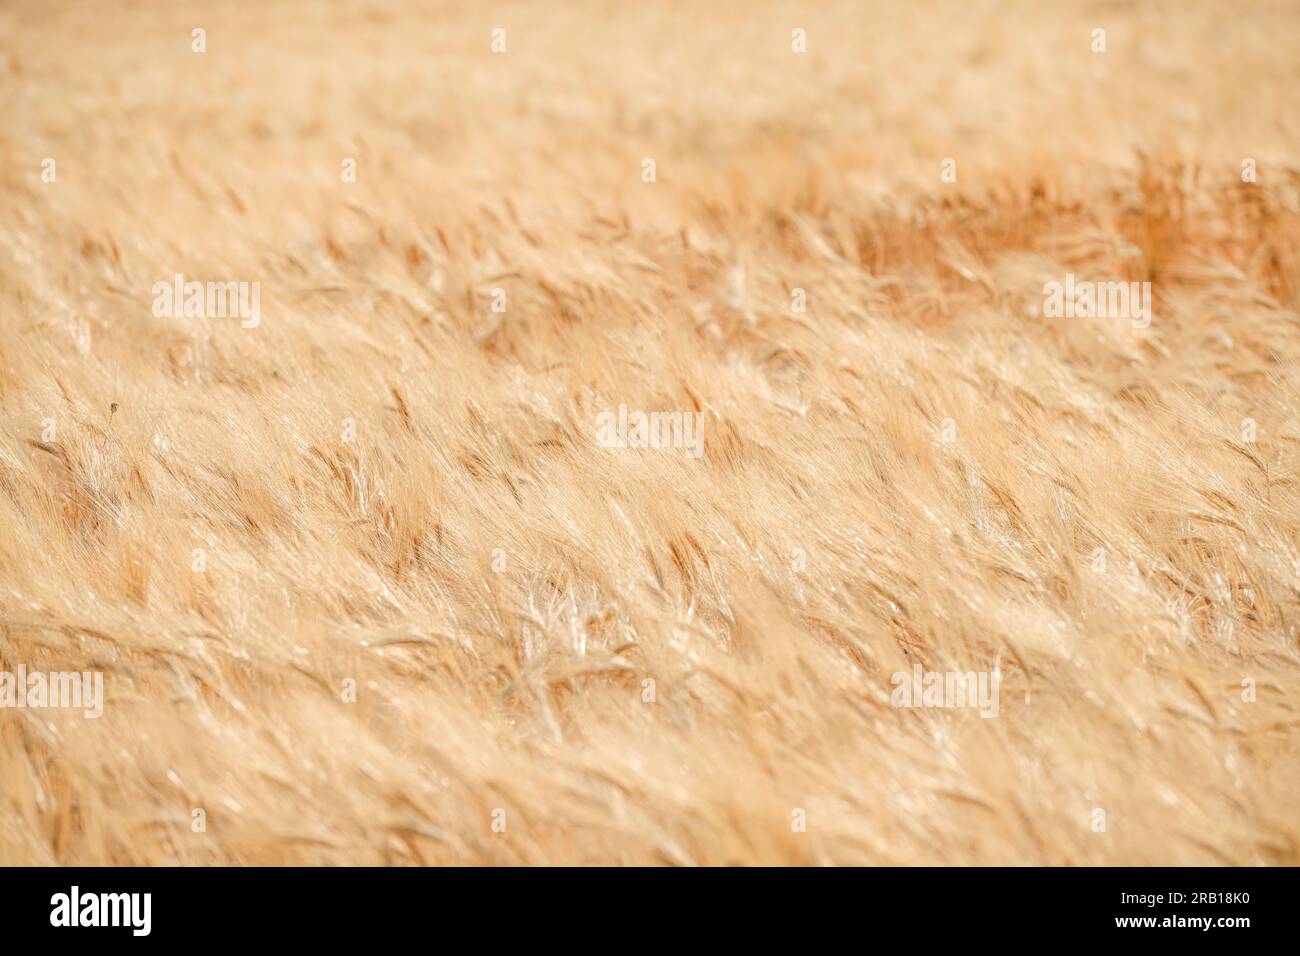 Barley field with golden awns downwind Stock Photo